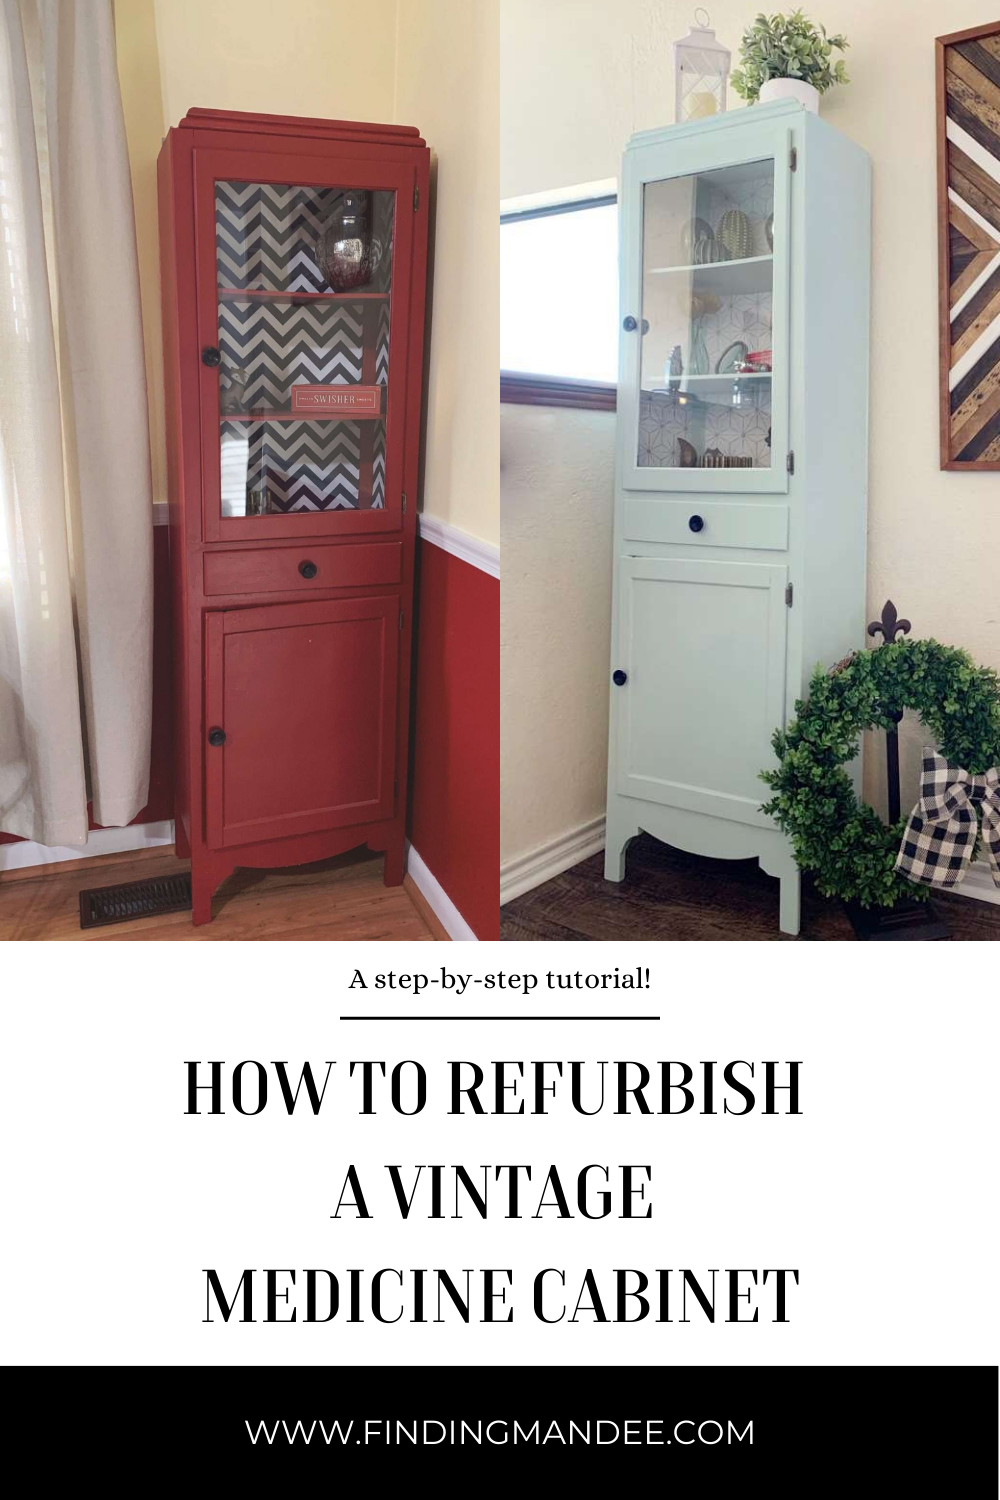 How to Refurbish a Vintage Medicine Cabinet: A Step-By-Step Tutorial | Finding Mandee